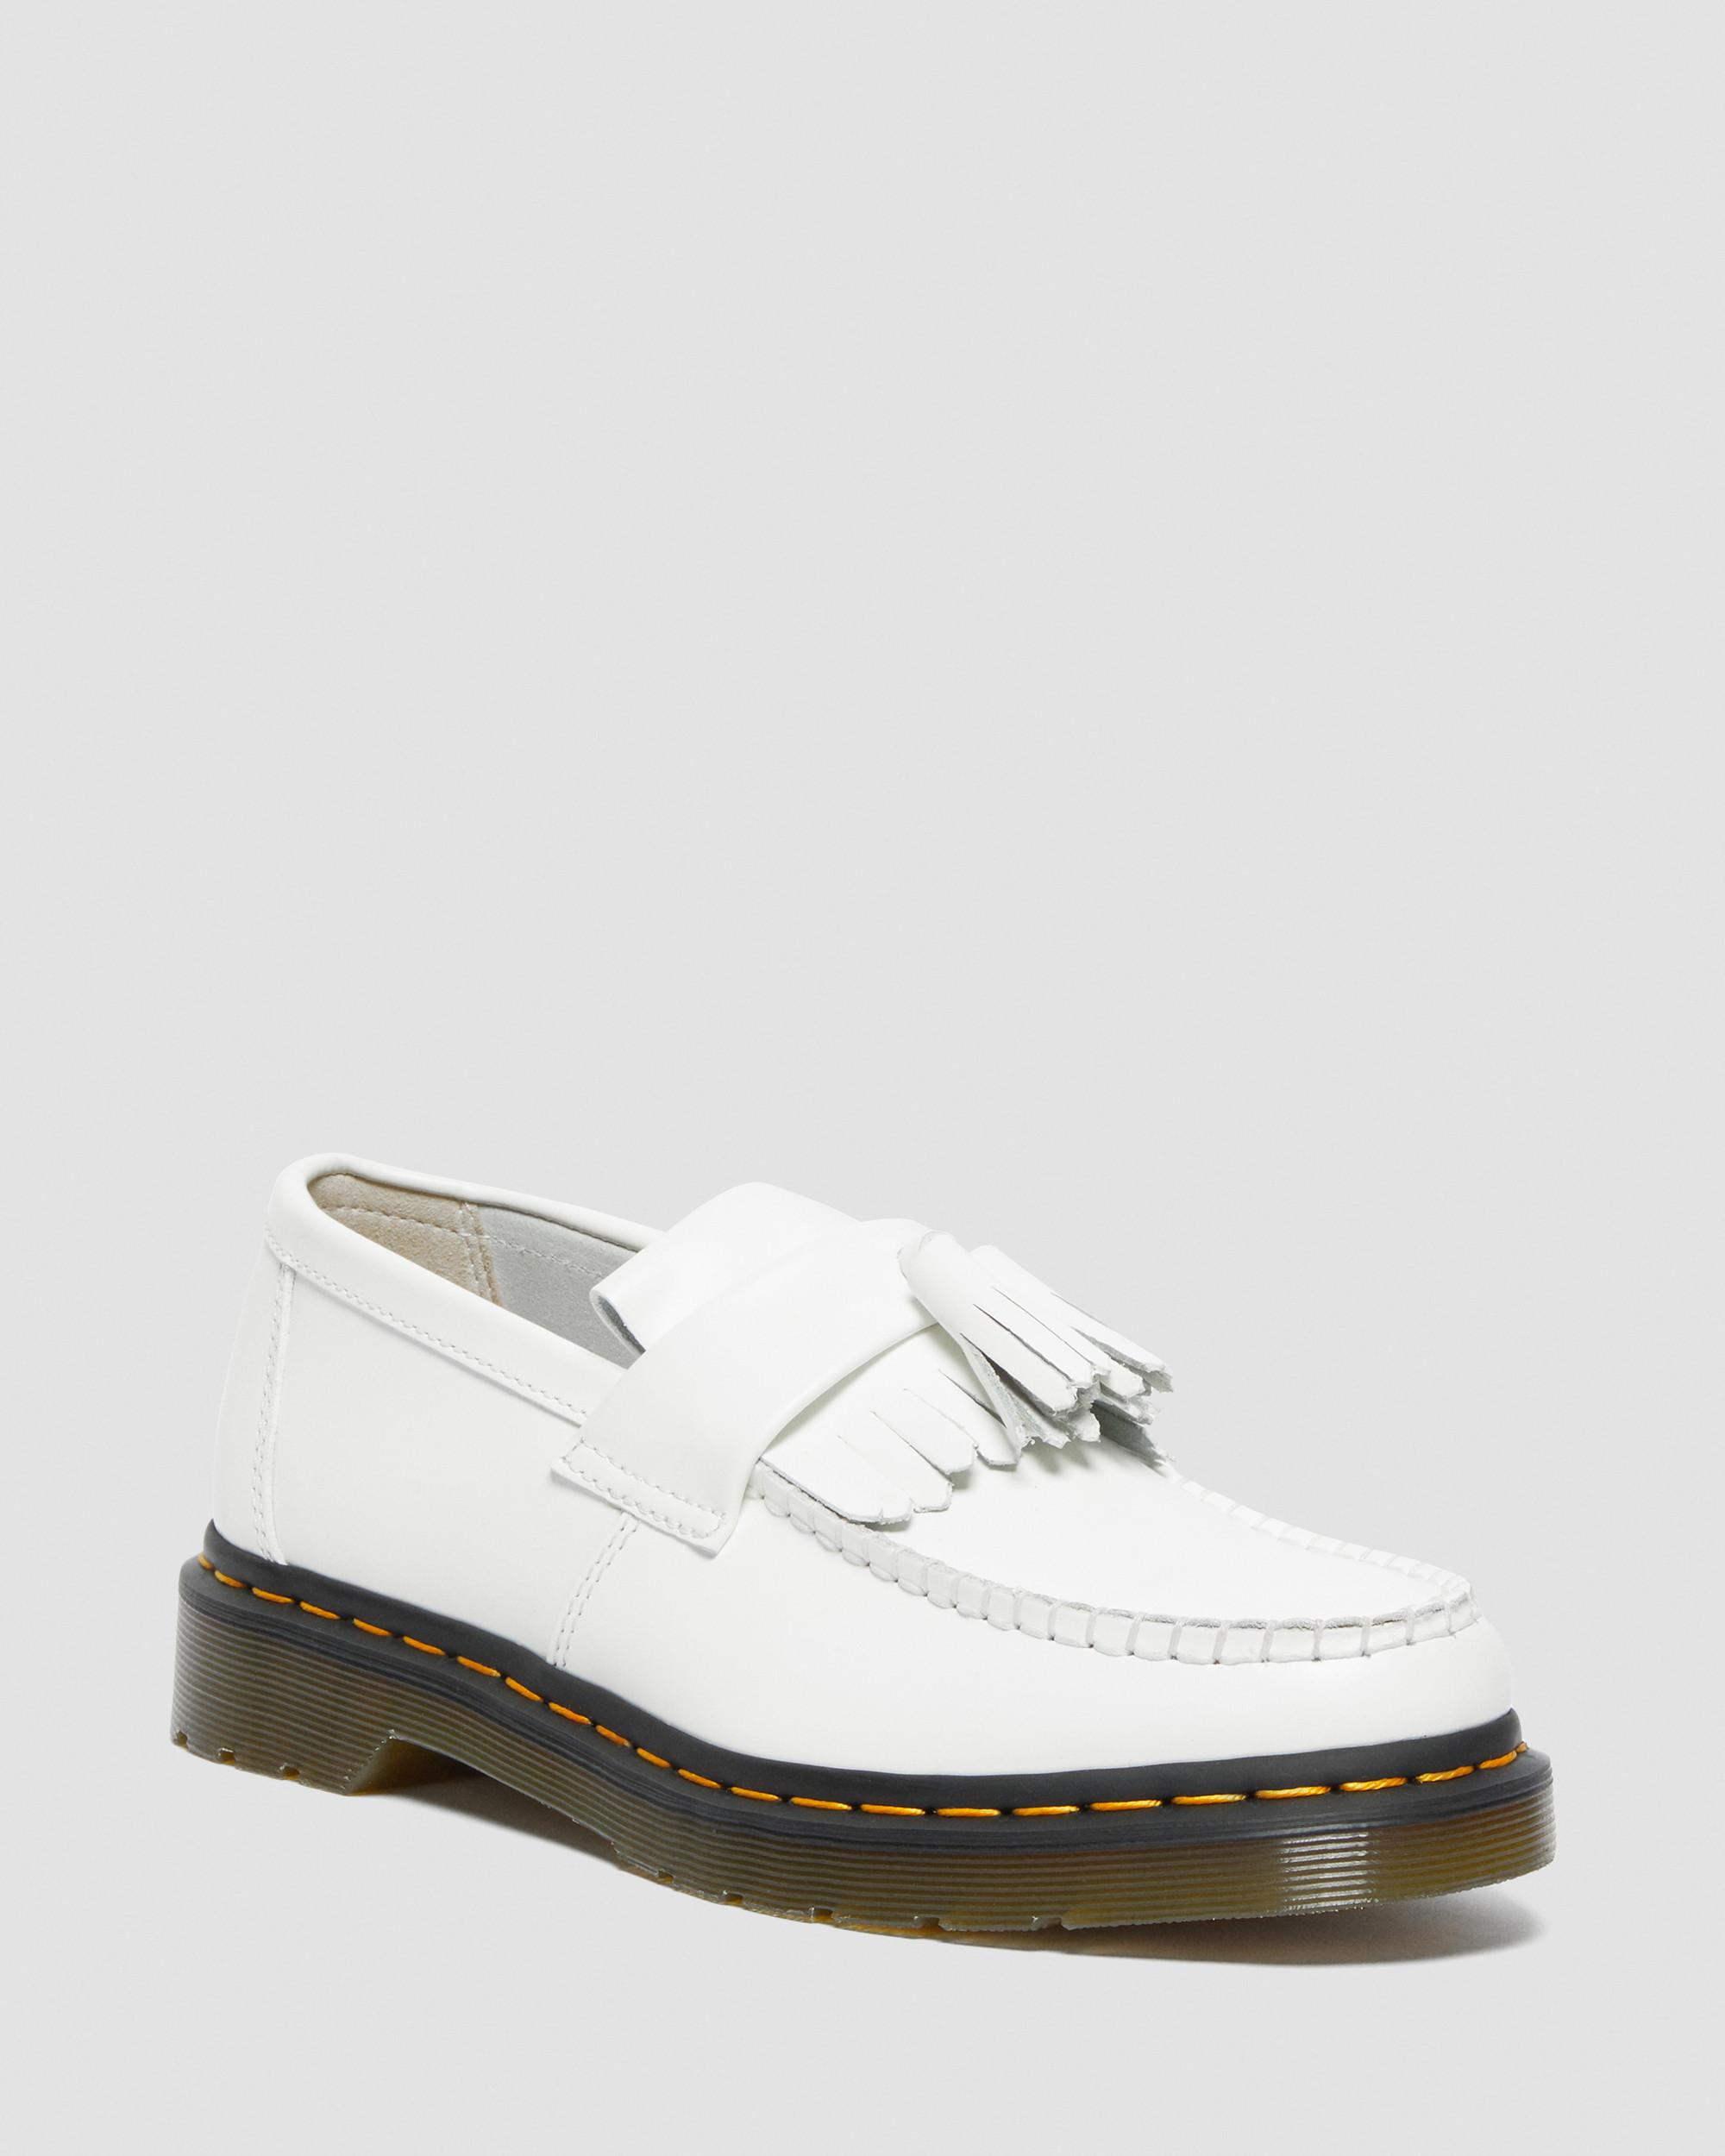 Adrian Yellow Stitch Leather Tassel Loafers in White | Dr. Martens